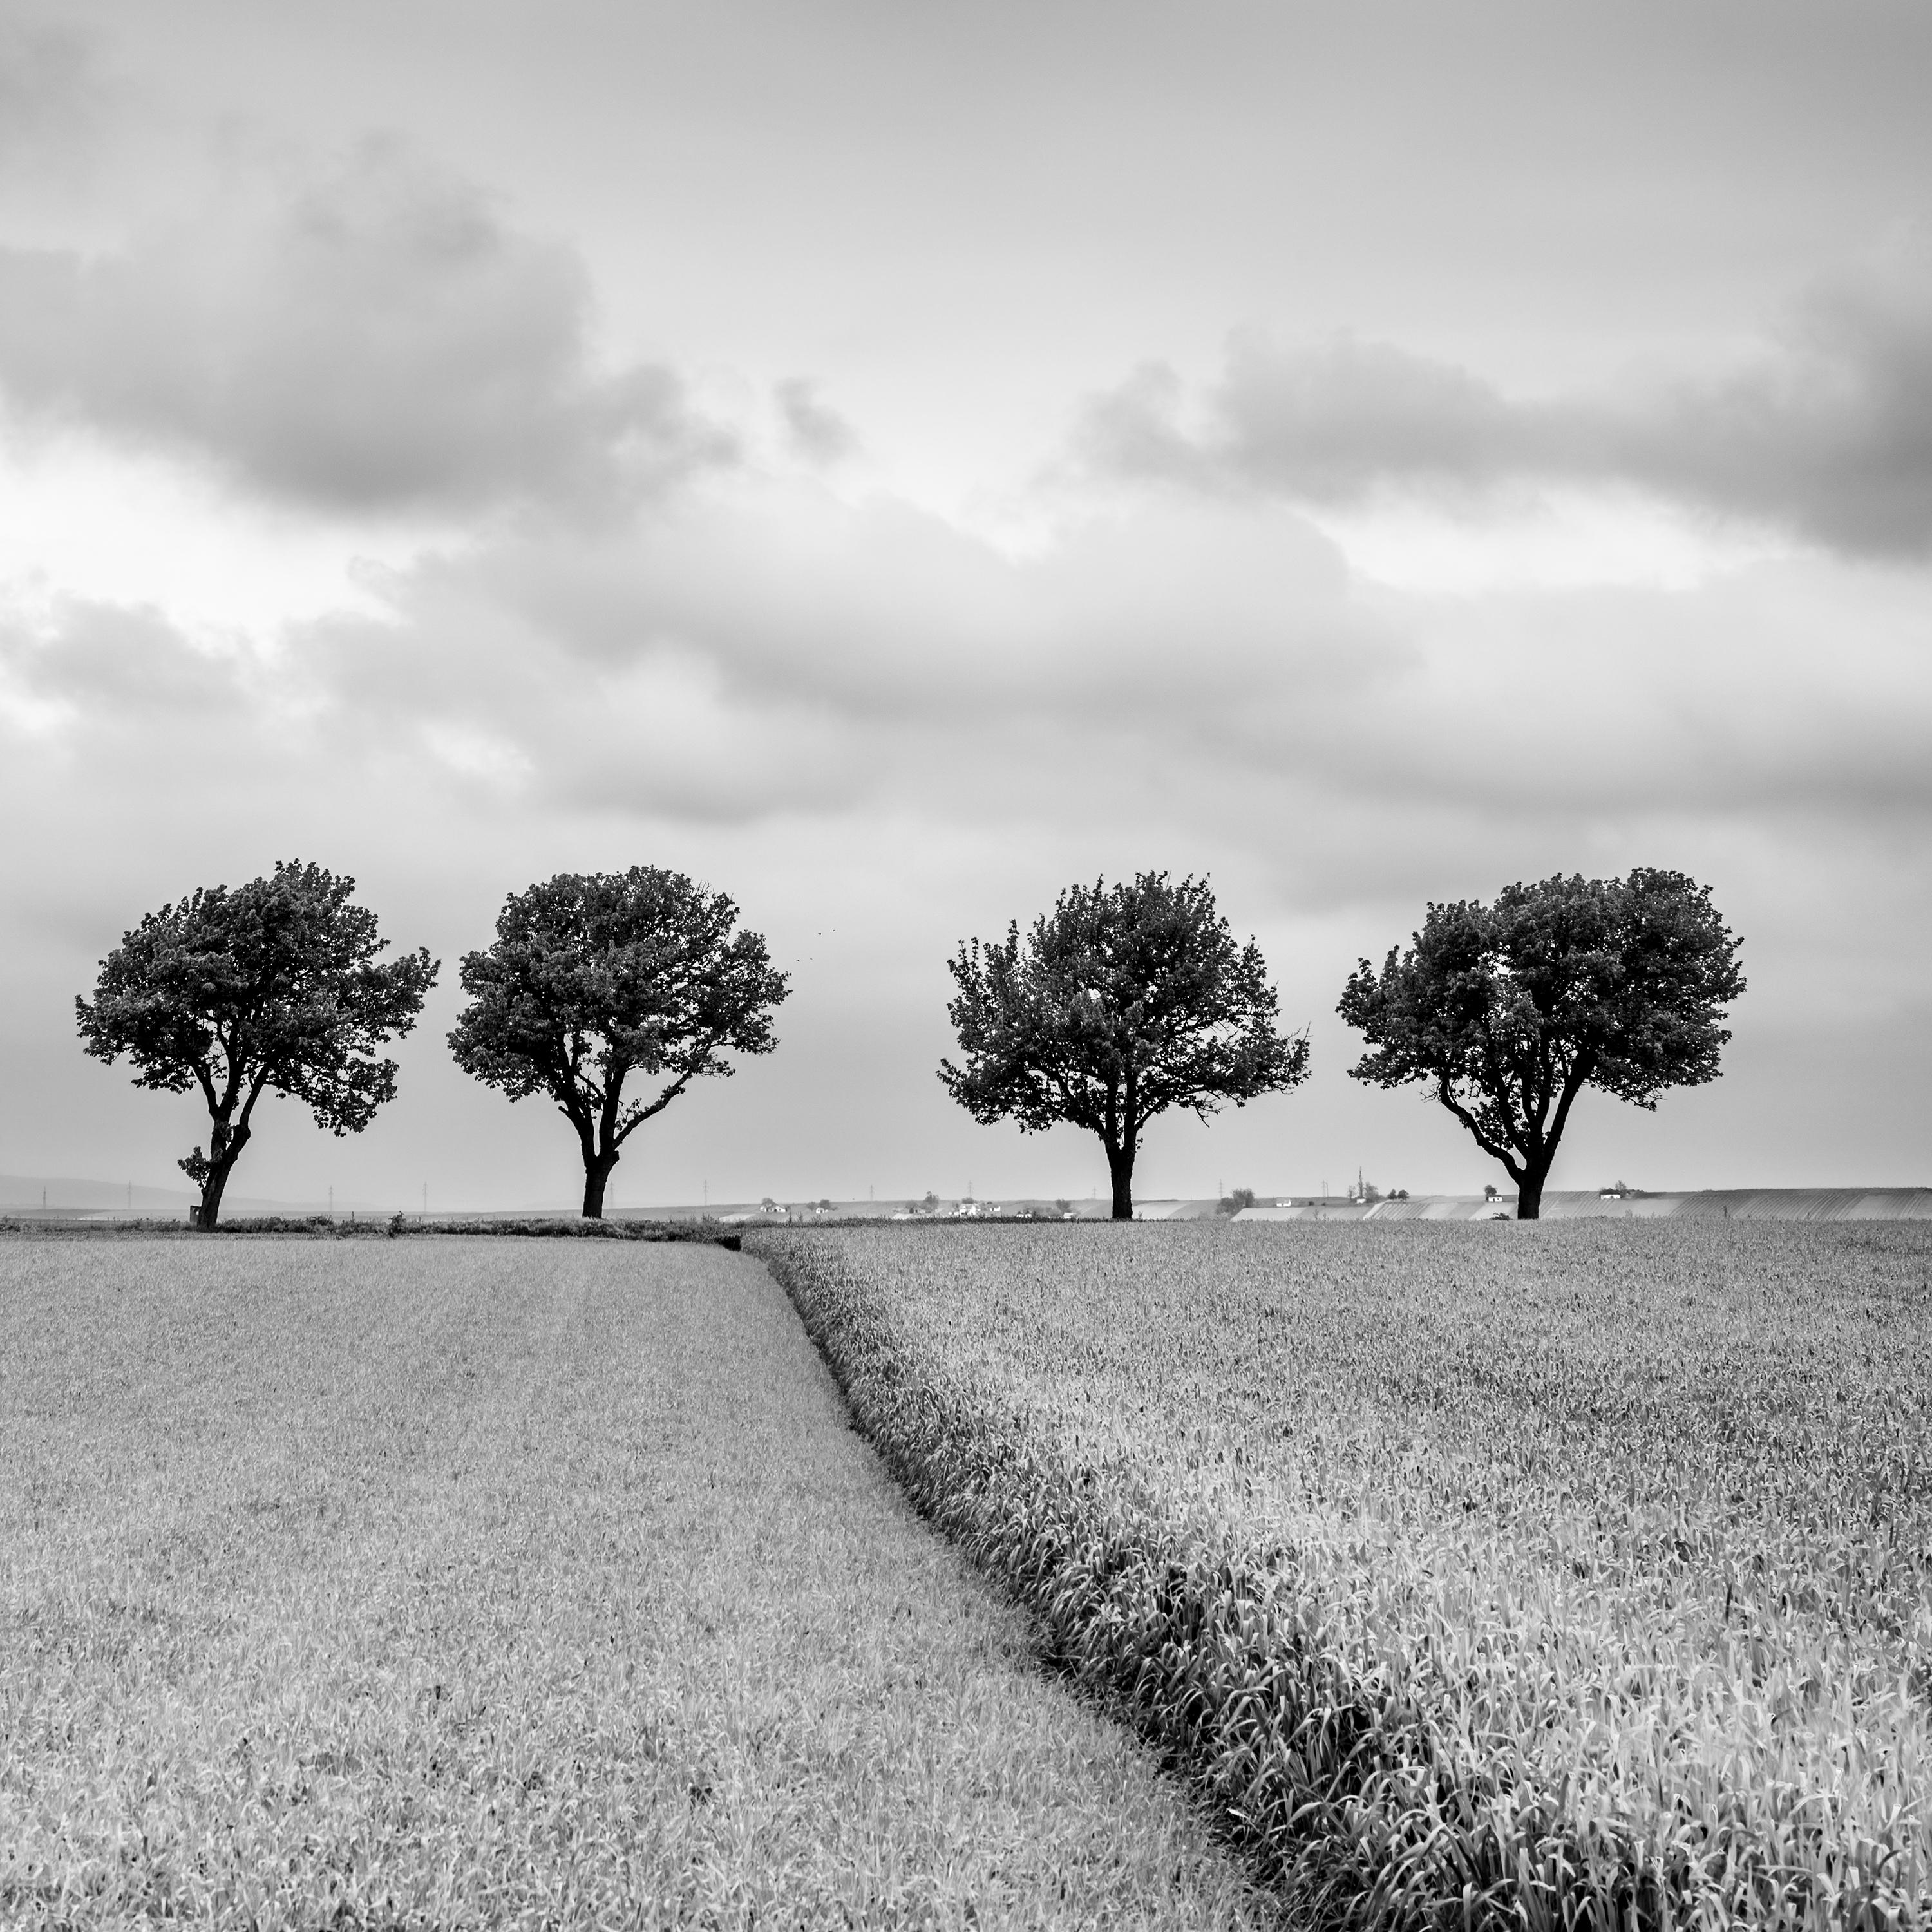 The Trees on the edge of Field, cloudy, storm, black white art landscape photography en vente 5